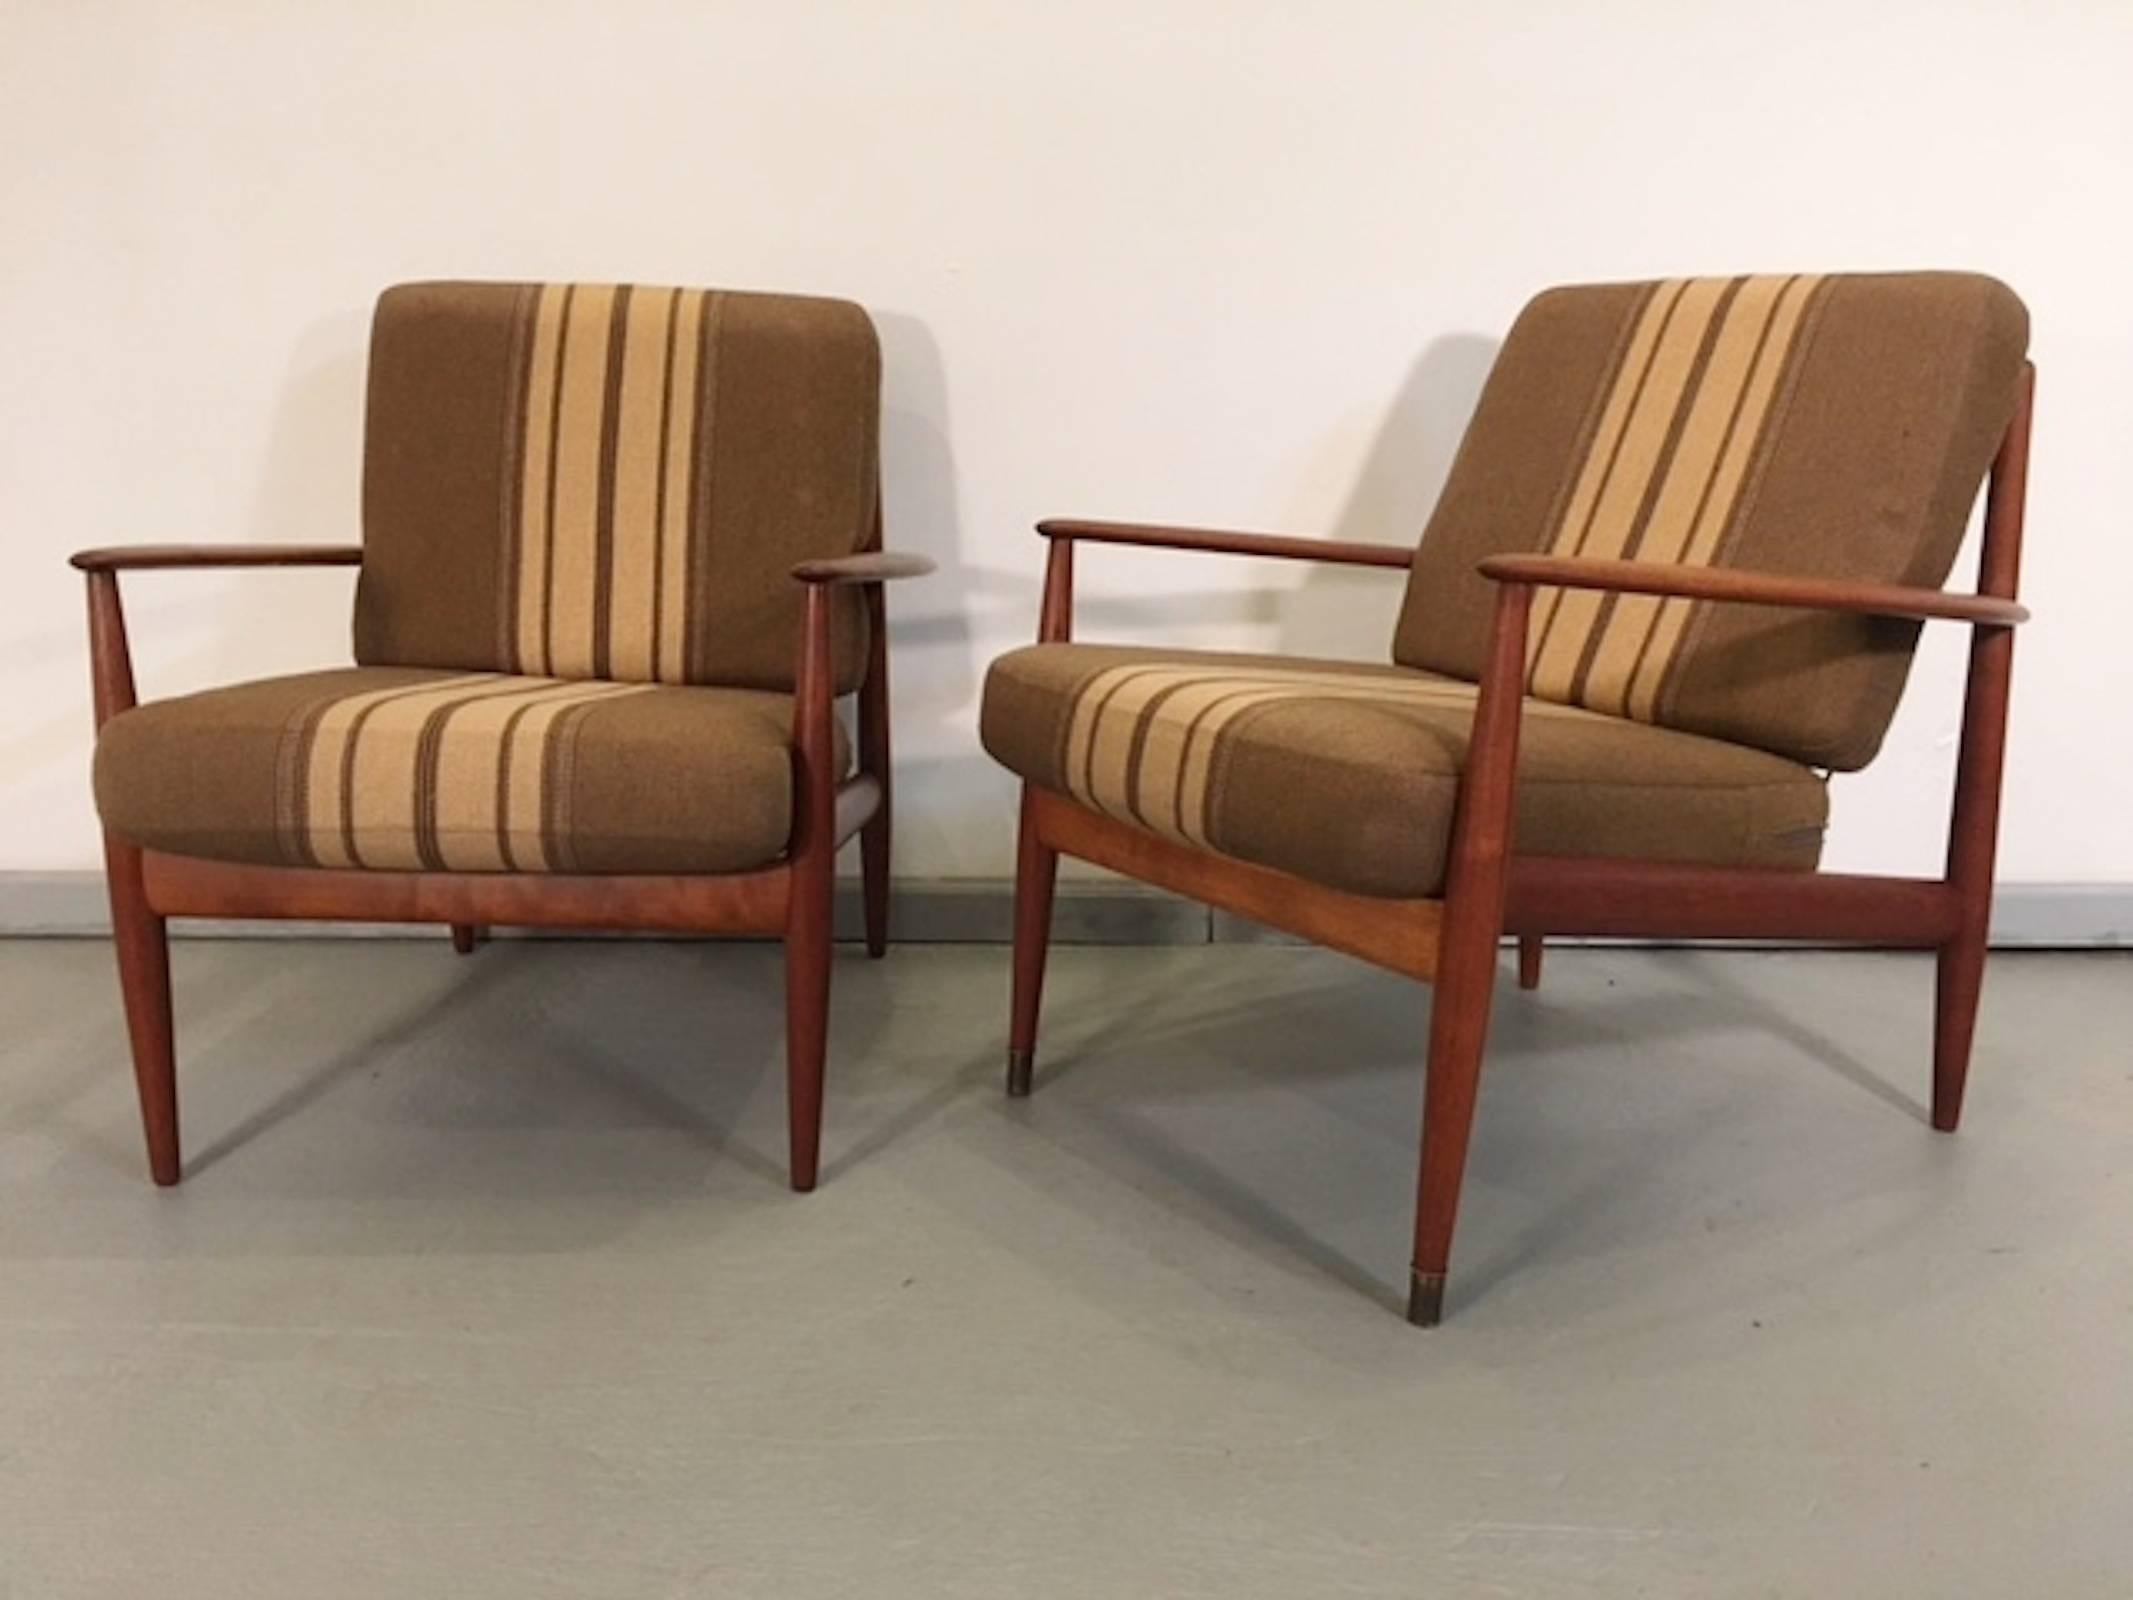 Vintage Danish chairs designed by Grete Jalk. Featuring long arms, tapered legs and rope or banded seat and back.

(Please confirm item location with dealer).
 